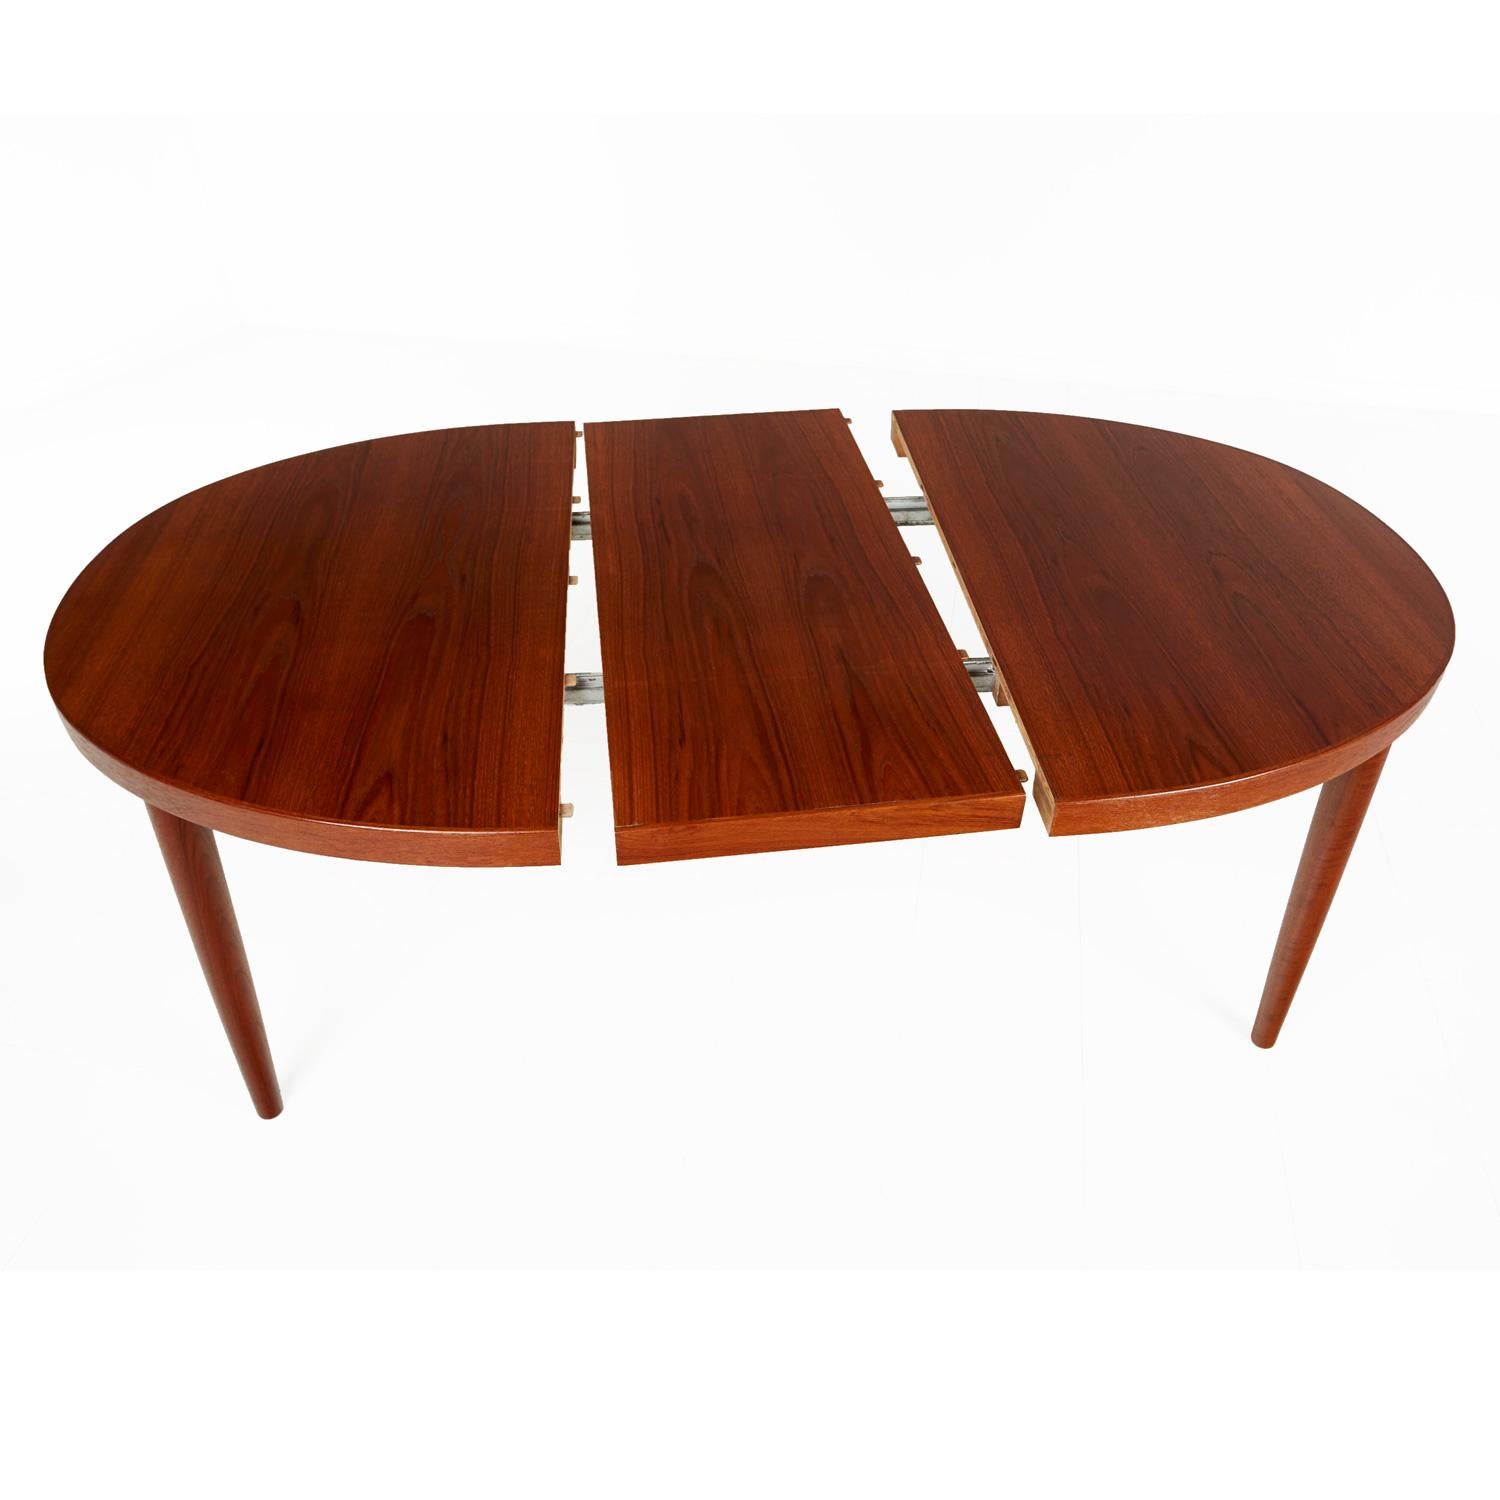 Mid-Century Modern Danish teak dining table by Skovmand Andersen. One of the finest Scandinavian producers of the era. This table bears the maker’s mark and Danish Control stamp. This stamp is reserved for the cream of the crop Danish furniture